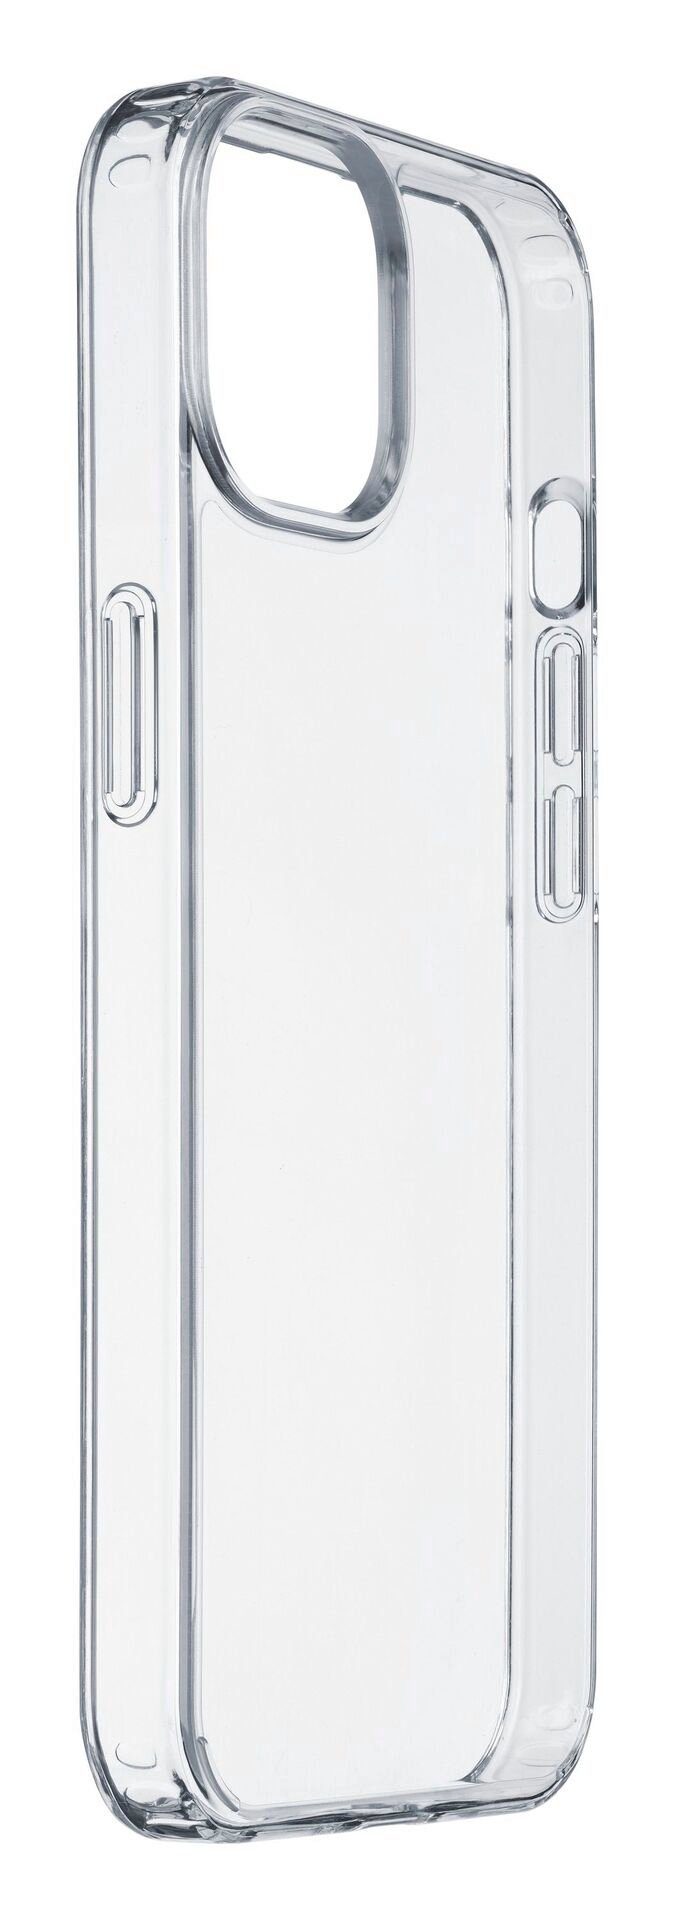 Cellularline Backcover Cellularline Hard Case CLEAR DUO iPhone 13, Transp.